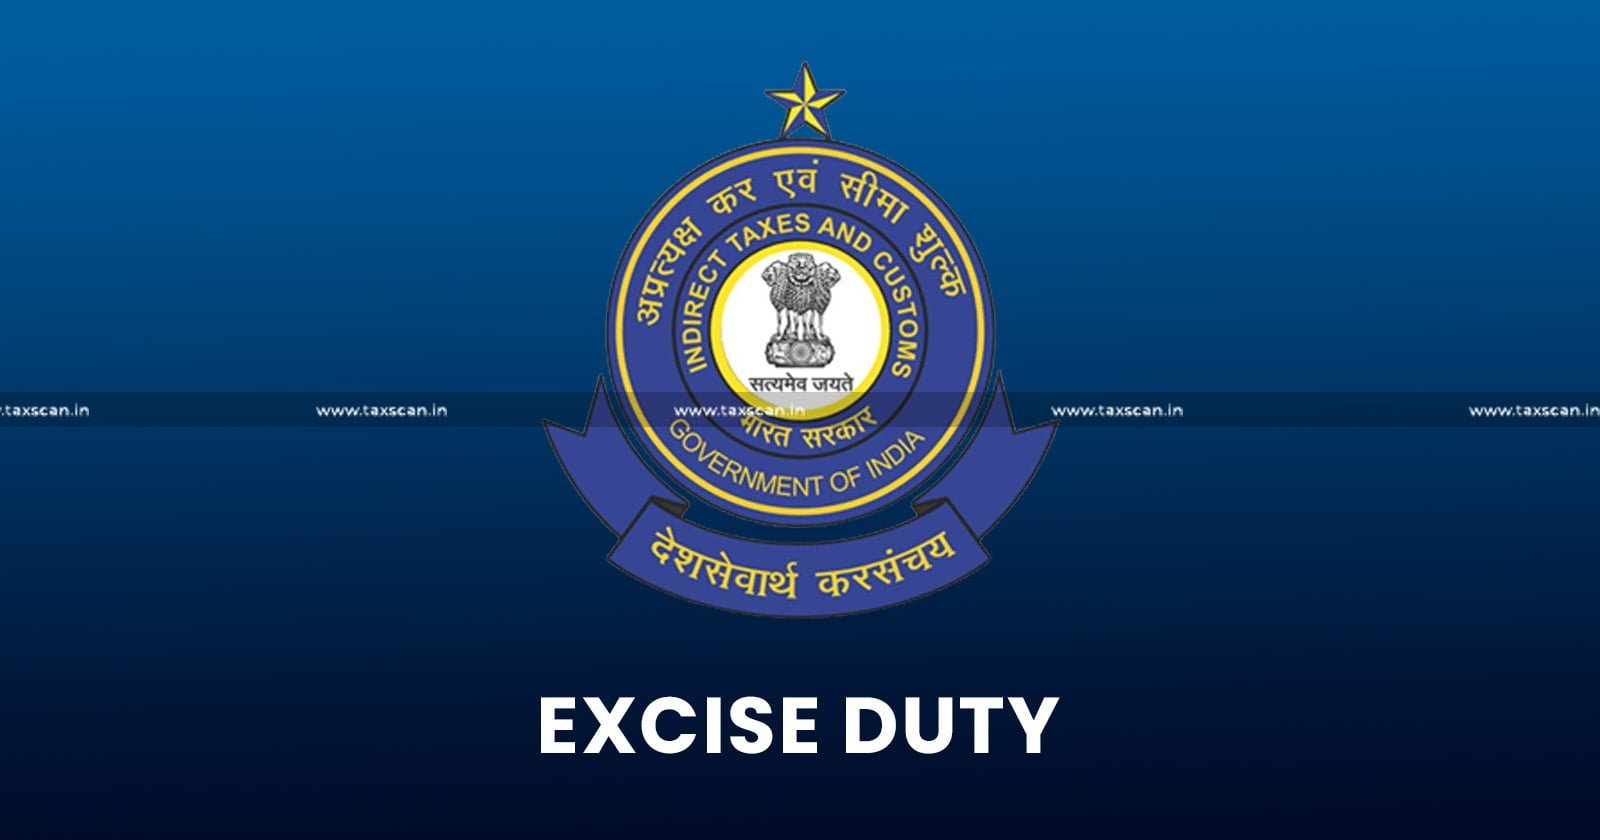 Central Excise Duty - Central Excise Duty Debited - State VAT Subsidy - VAT Subsidy - VAT - State VAT Subsidy under Protest - Protest - CESTAT allows Refund Claim of Excise Duty - CESTAT - Refund Claim - Excise Duty - taxscan